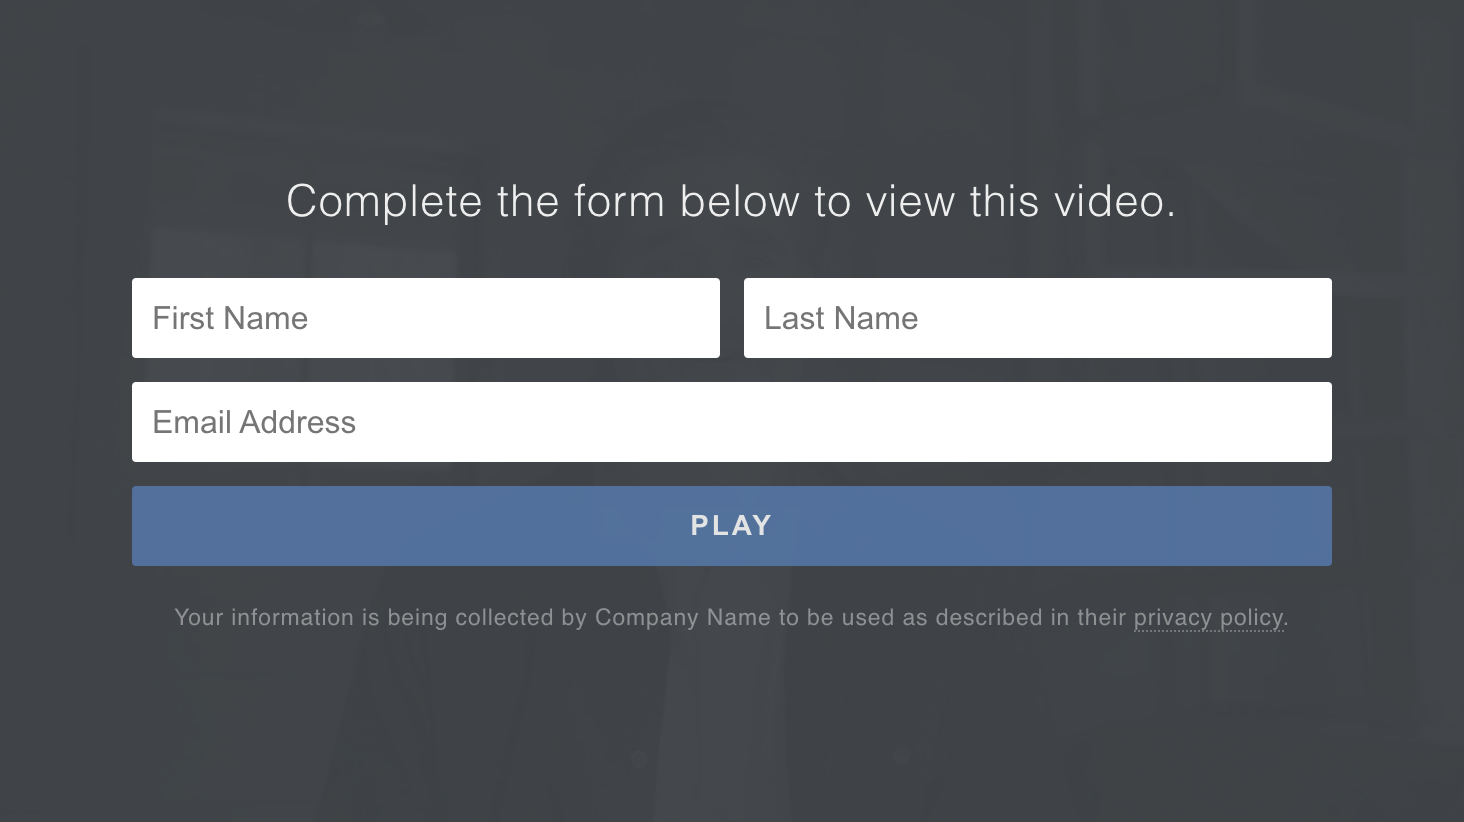 An embedded video with default lead capture form enabled